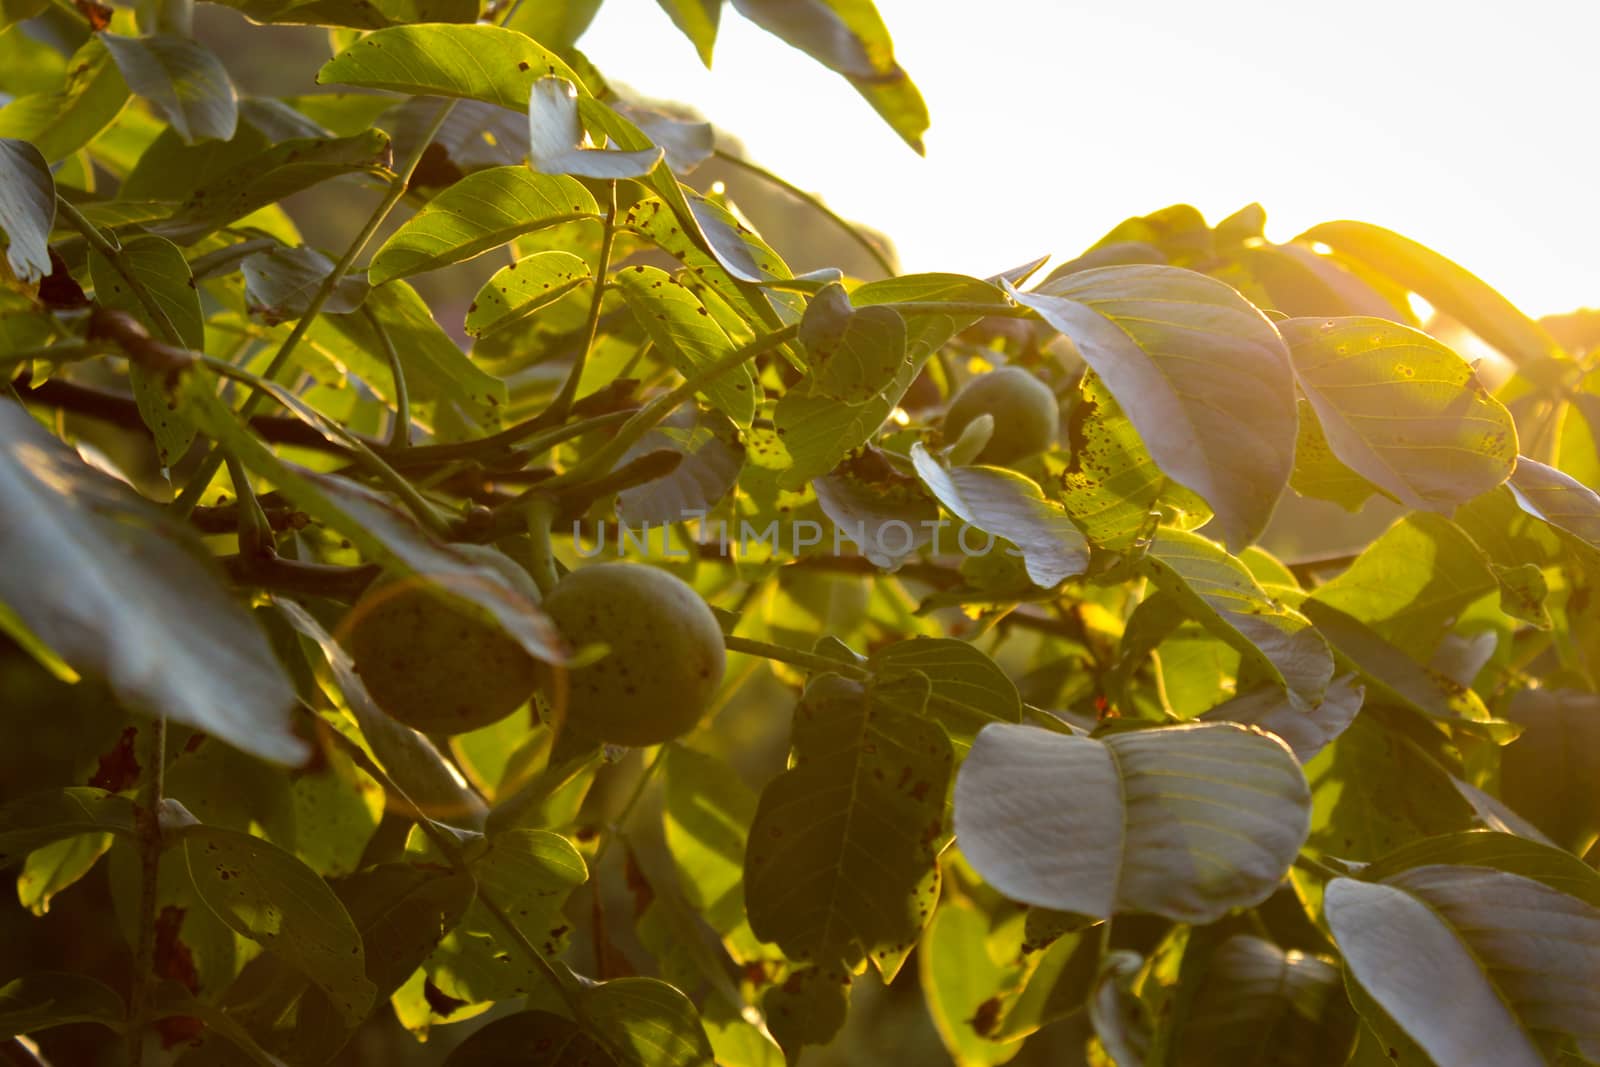 Walnut tree with walnuts and leaves with a yellow reflection of the sun. Zavidovici, Bosnia and Herzegovina.